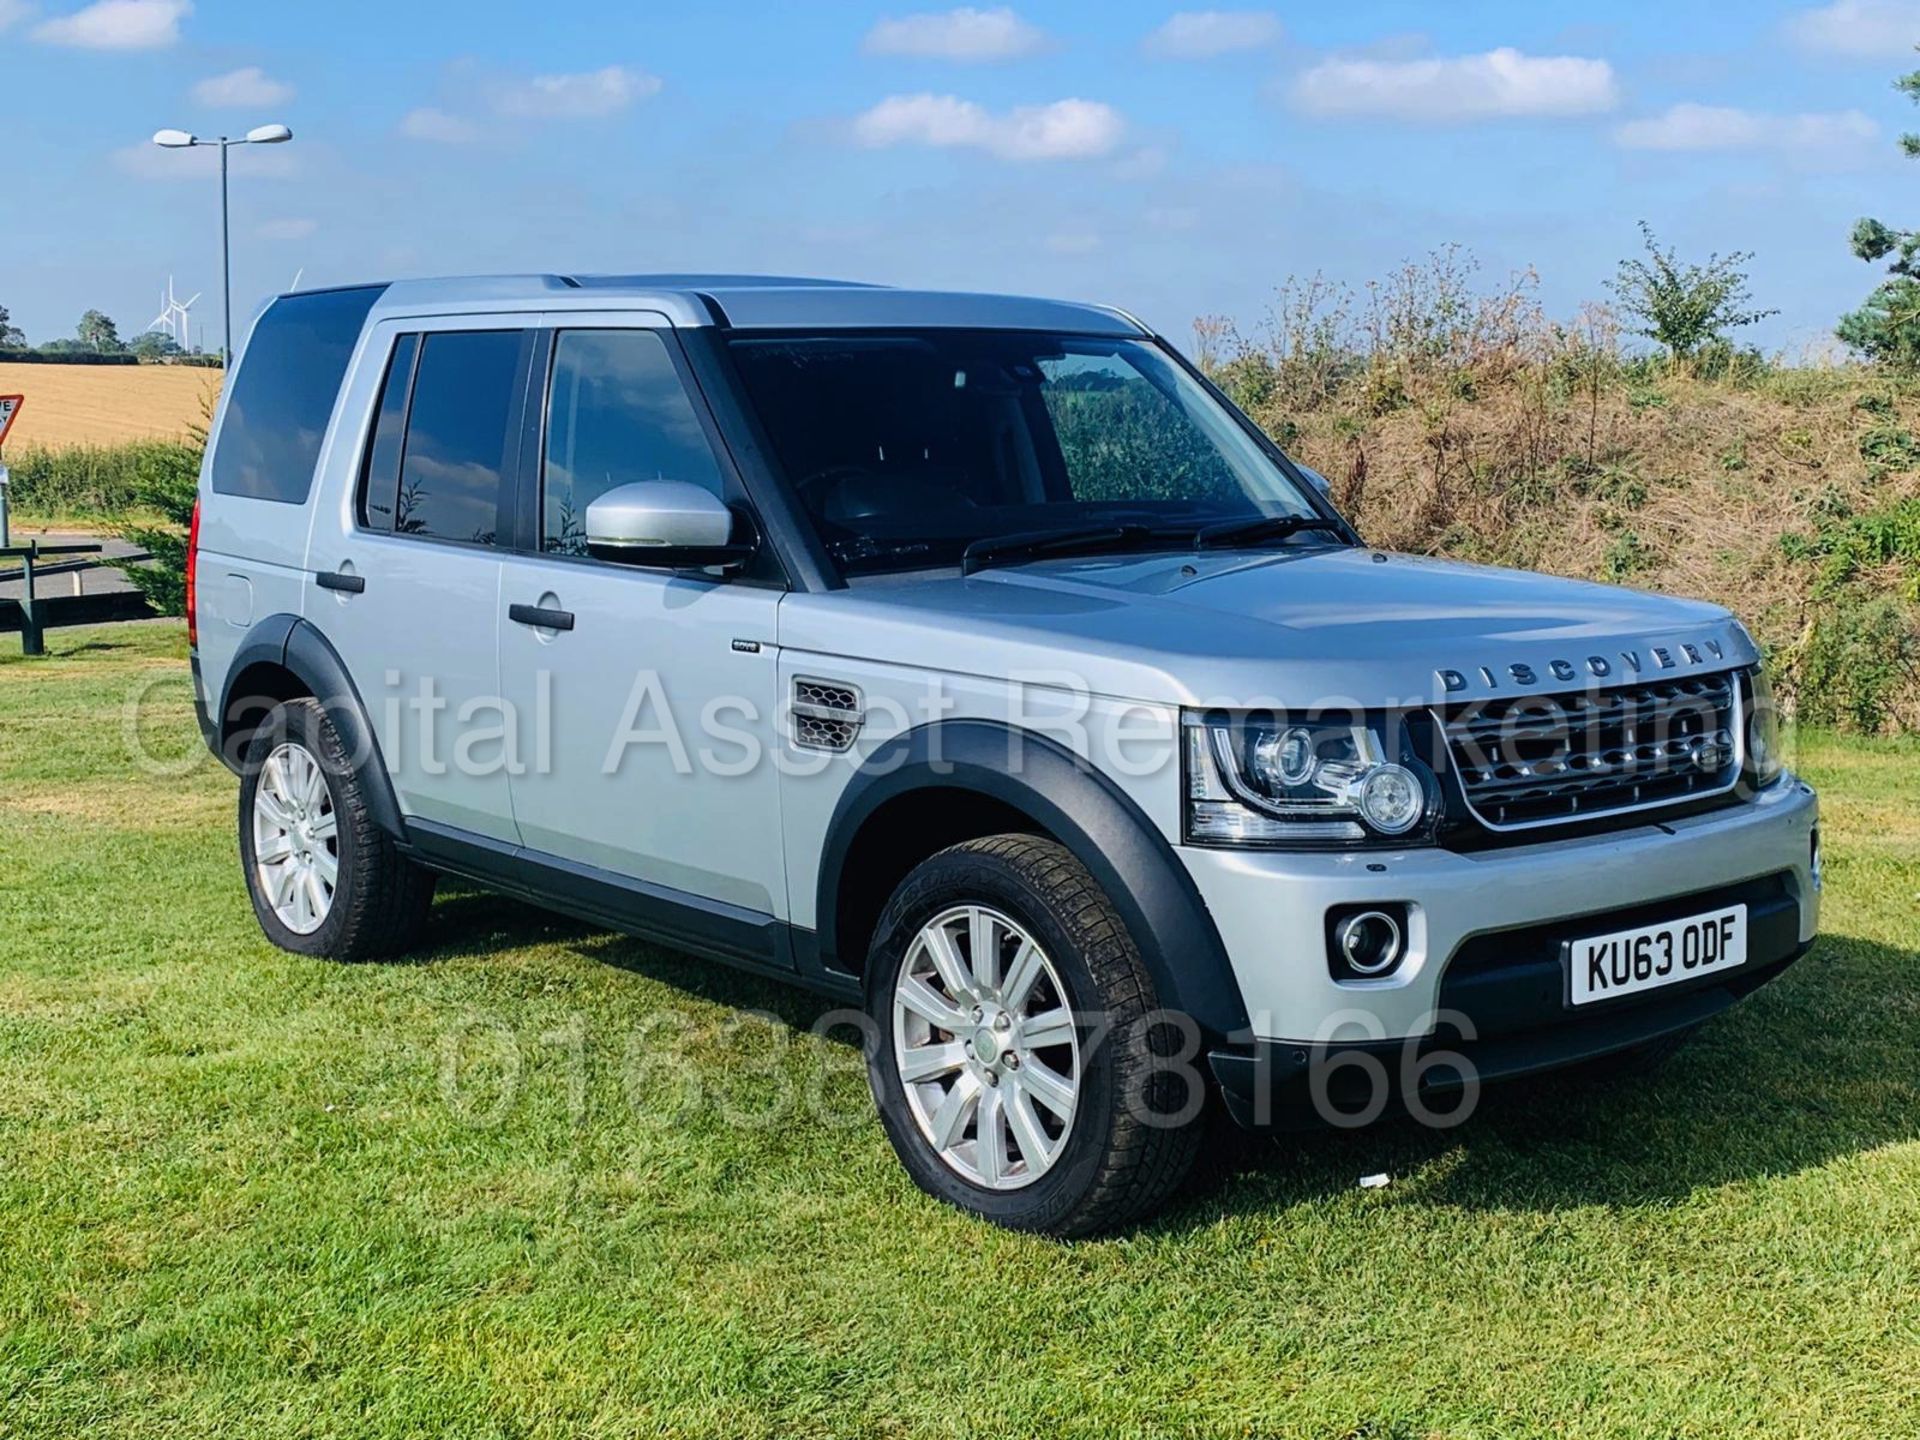 LAND ROVER DISCOVERY *XS EDITION* (2014) '3.0 SDV6 - 255 BHP - 8 SPEED AUTO' *LEATHER & SAT NAV*